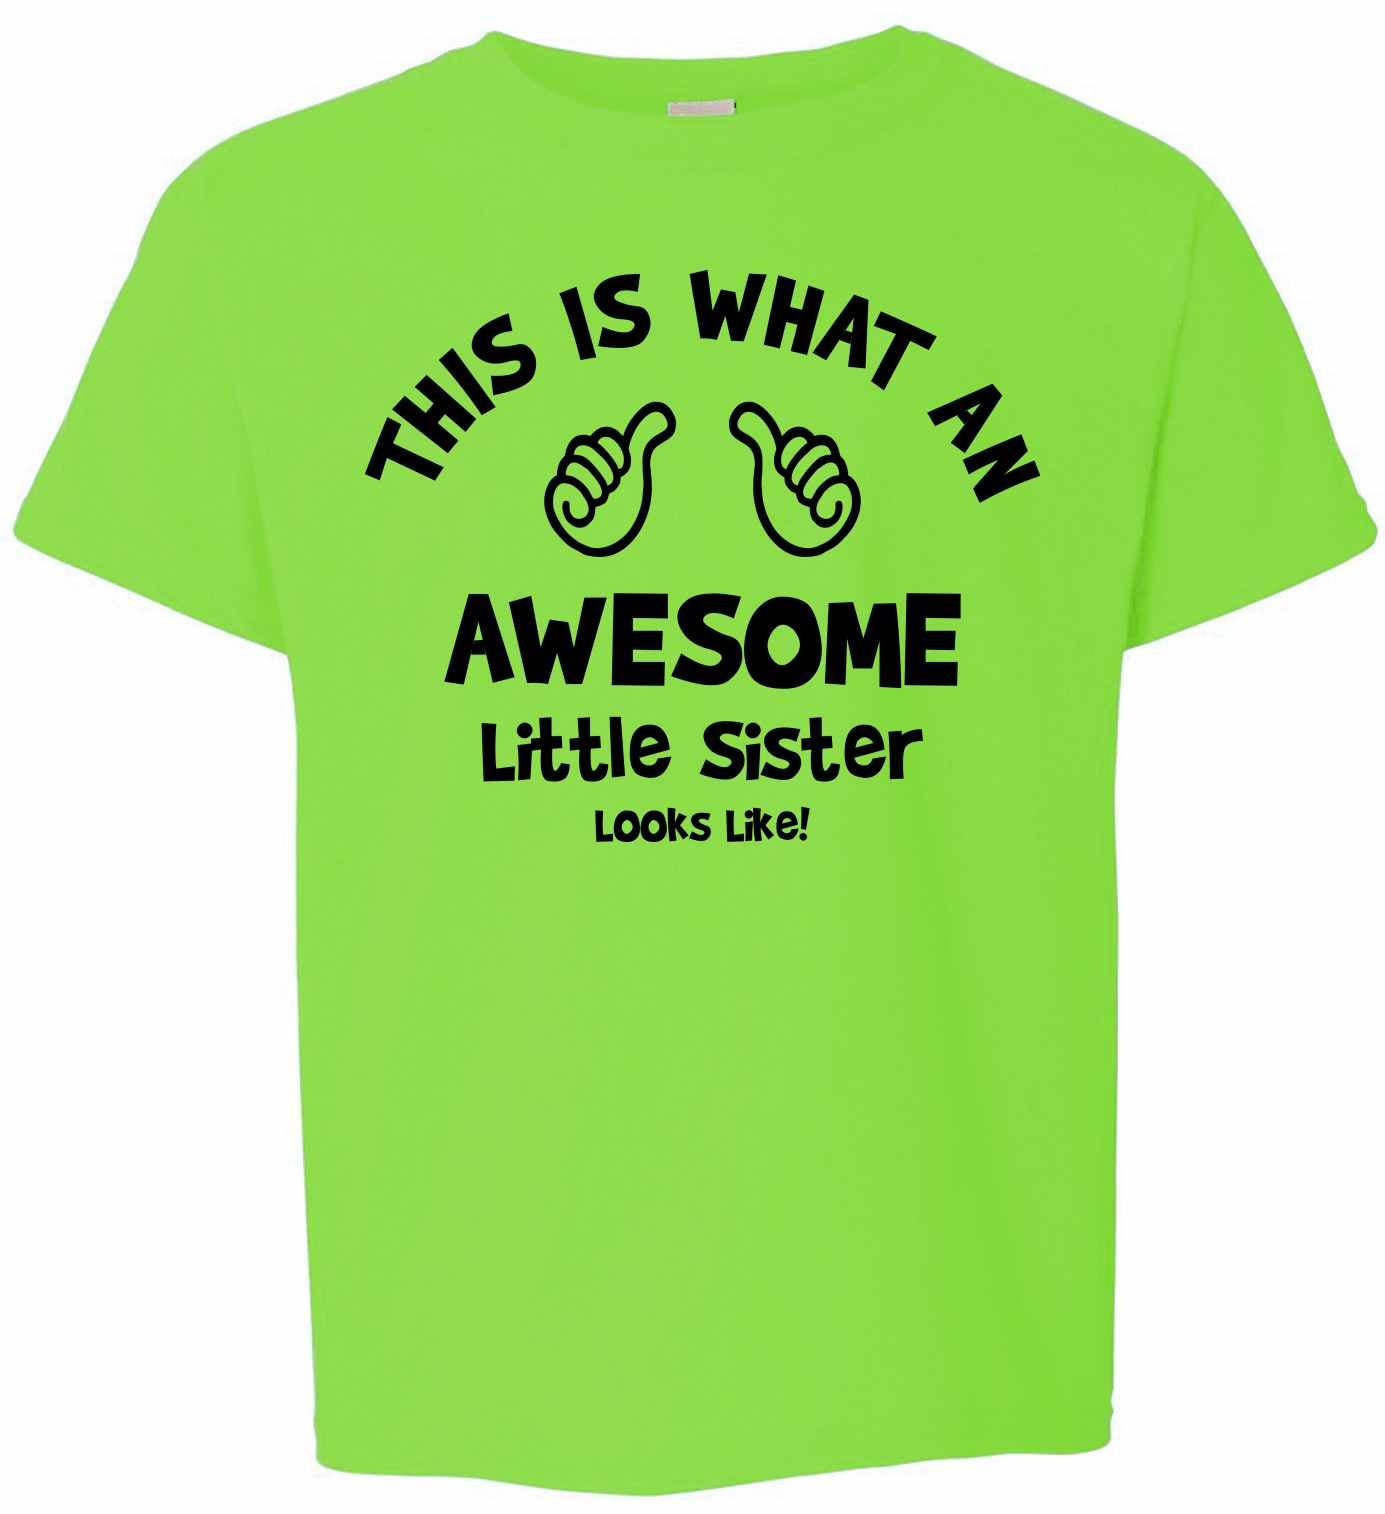 This is What an AWESOME LITTLE SISTER Looks Like on Kids T-Shirt (#1037-201)